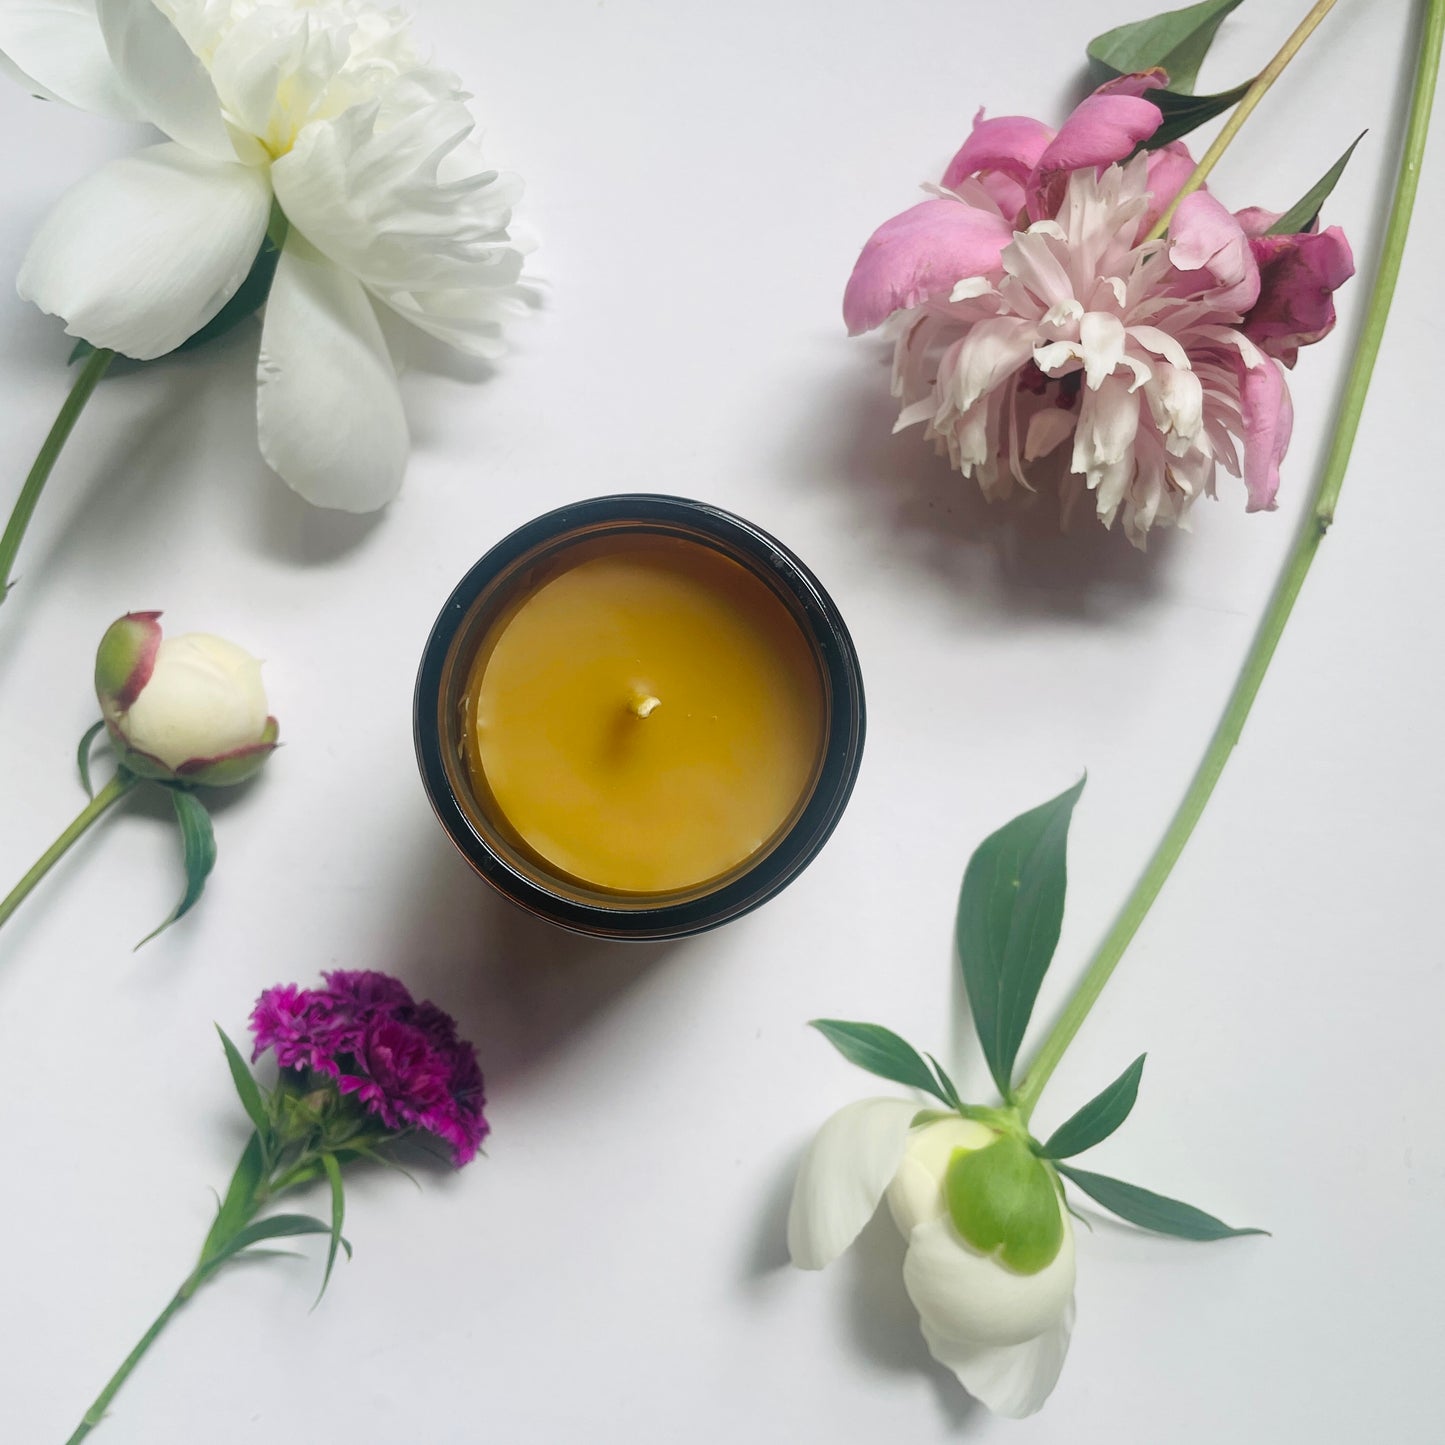 Aromatherapy Beeswax Jar Candle - NIGHTBLOOM - Triple Wick // Woodland Aroma - Beeswax Candle - Amber Glass Jar Candle - 50 hour burn time